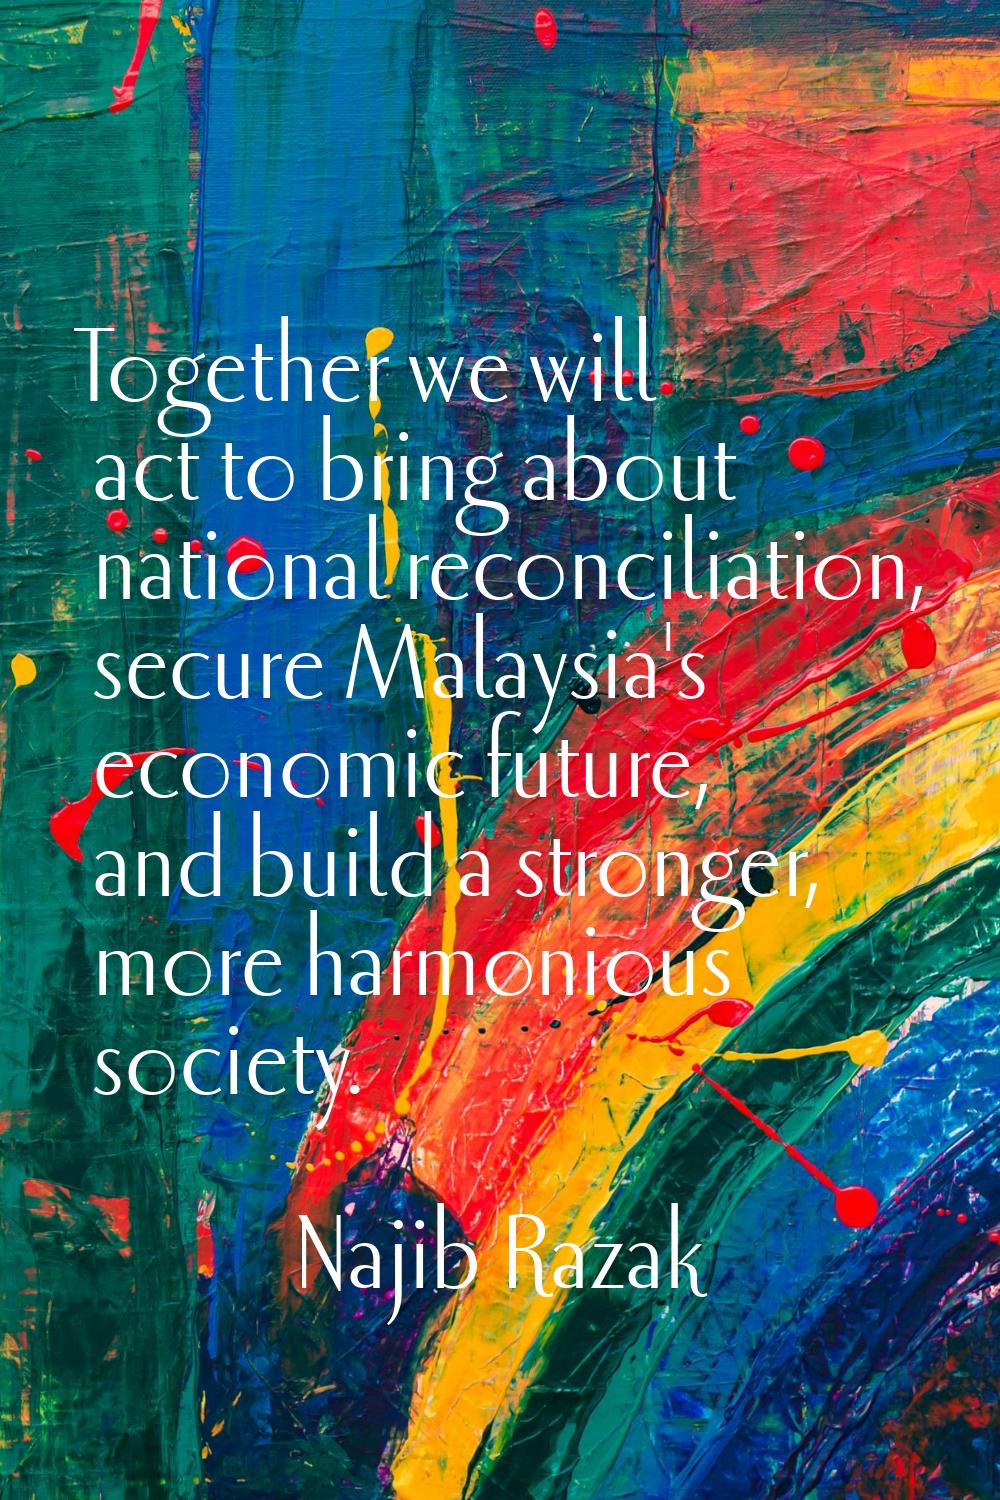 Together we will act to bring about national reconciliation, secure Malaysia's economic future, and